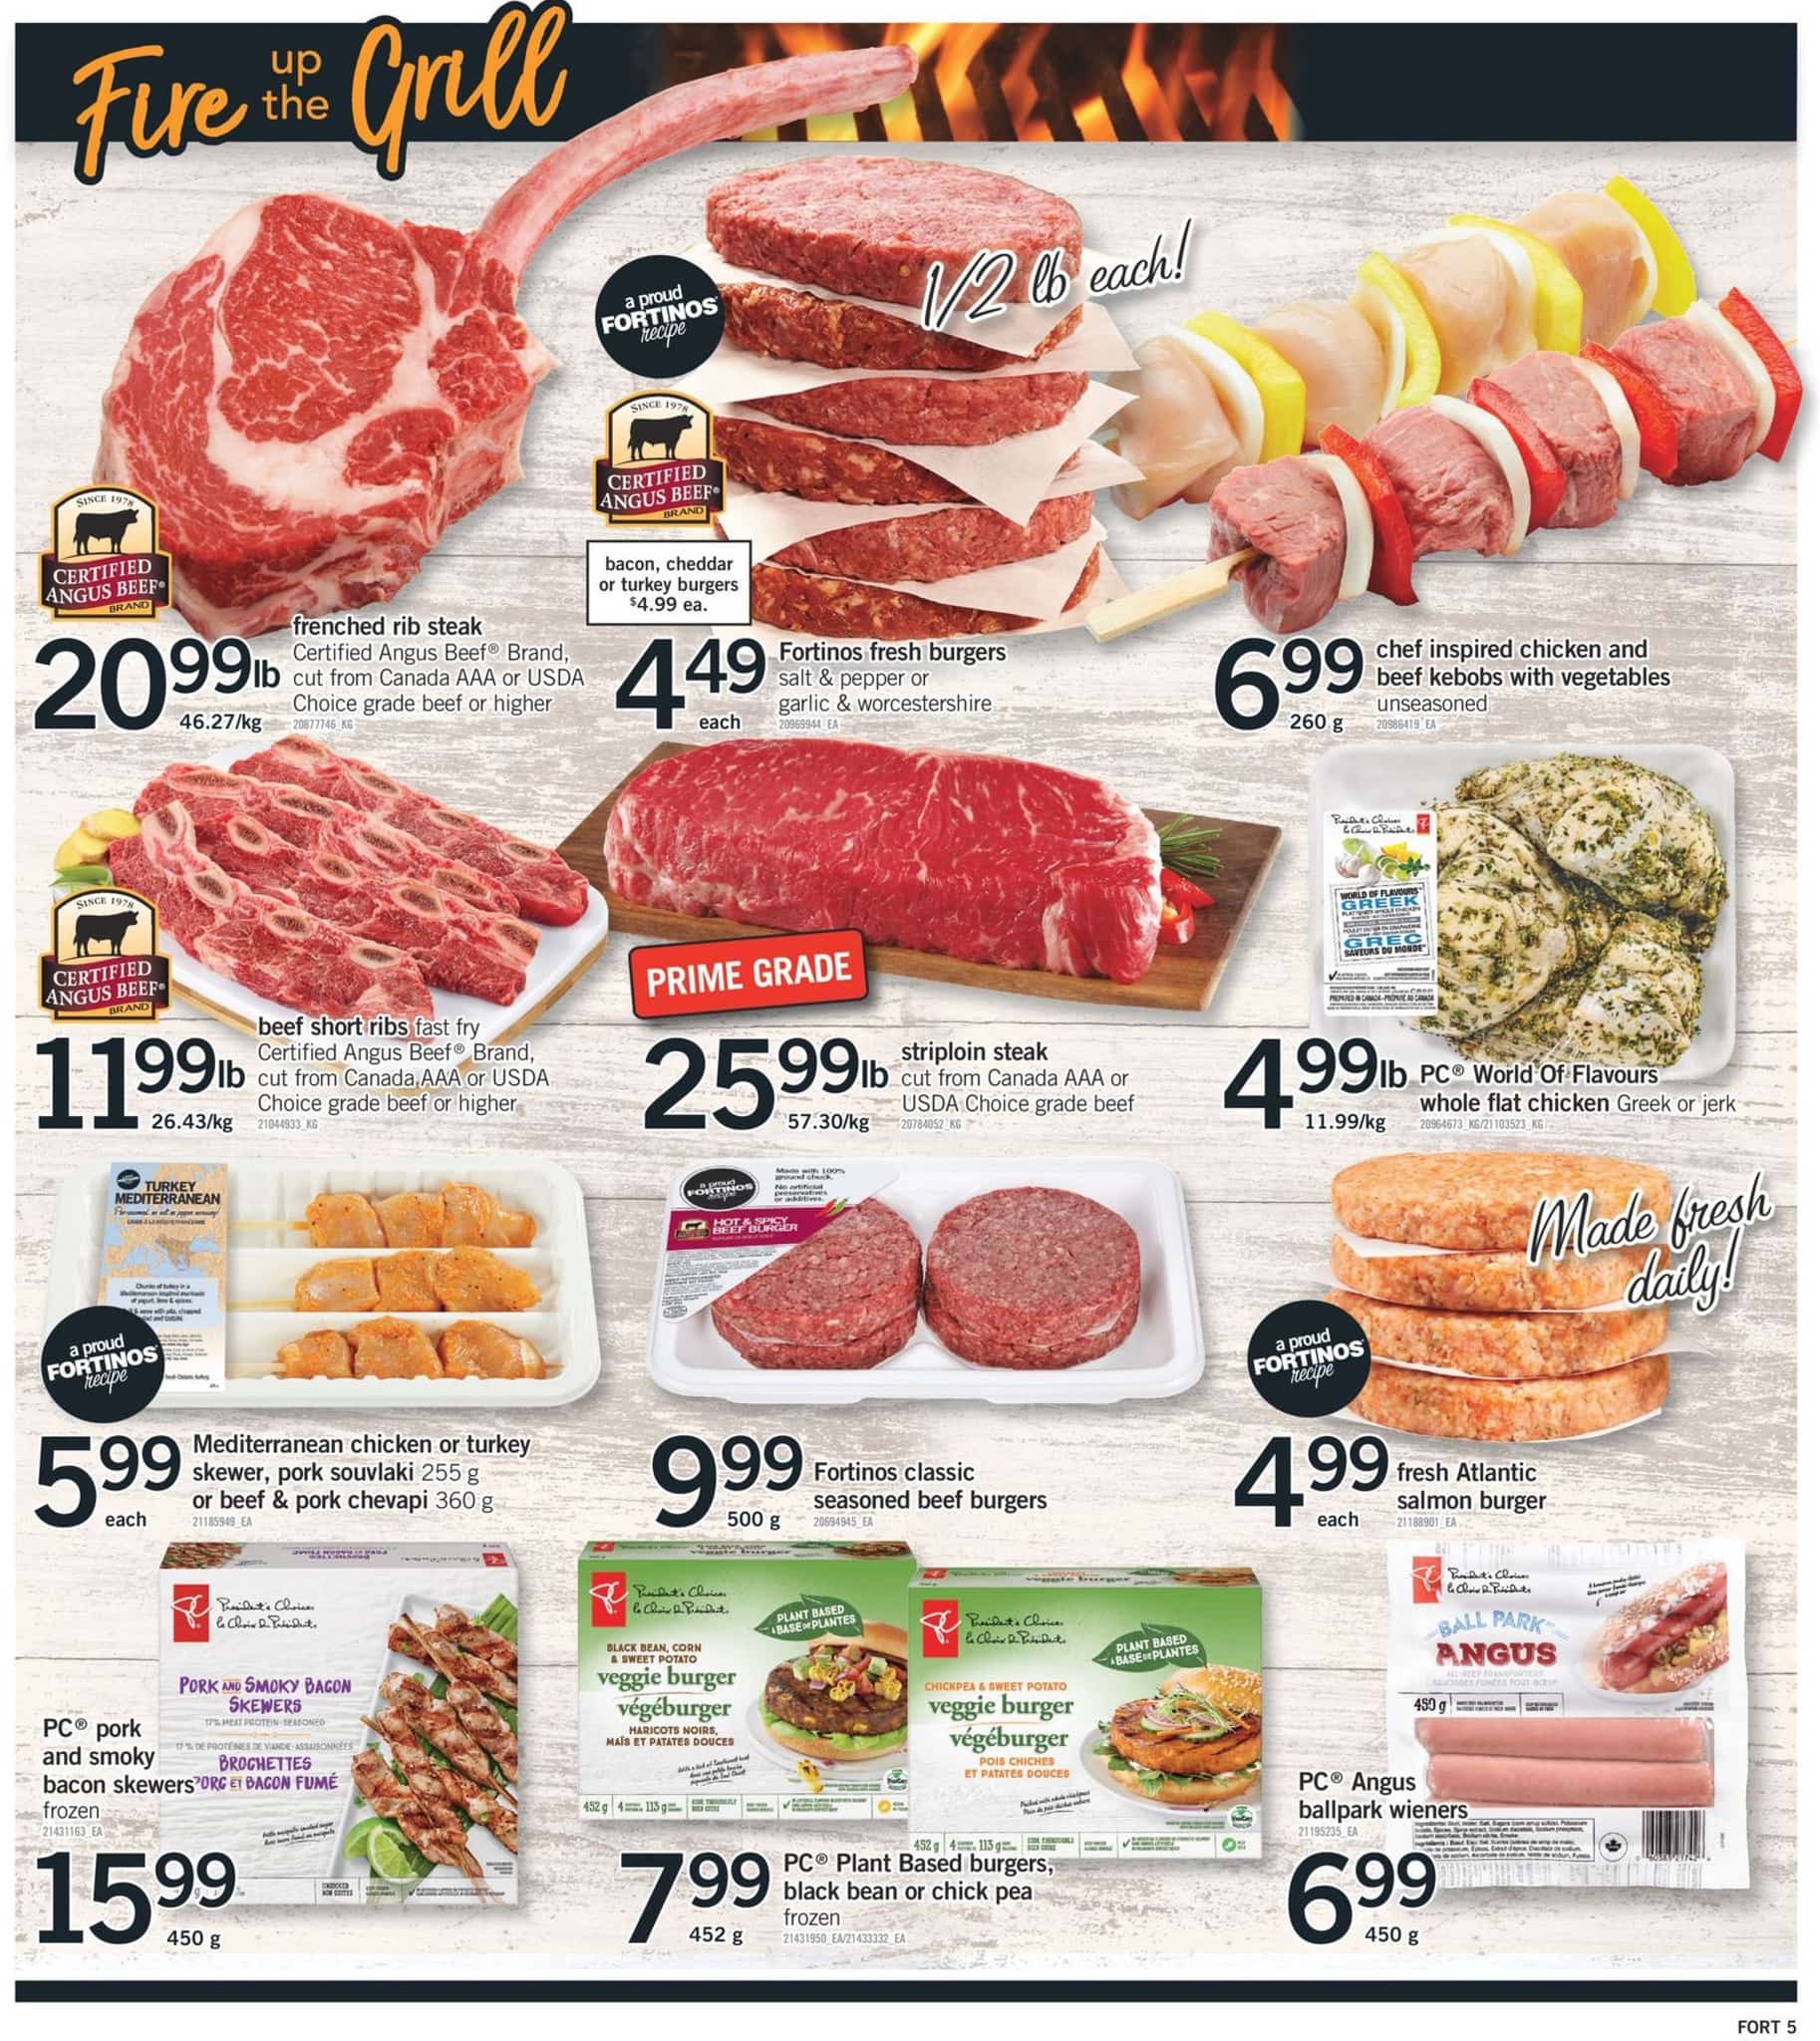 Fortinos - Weekly Flyer Specials - Page 6